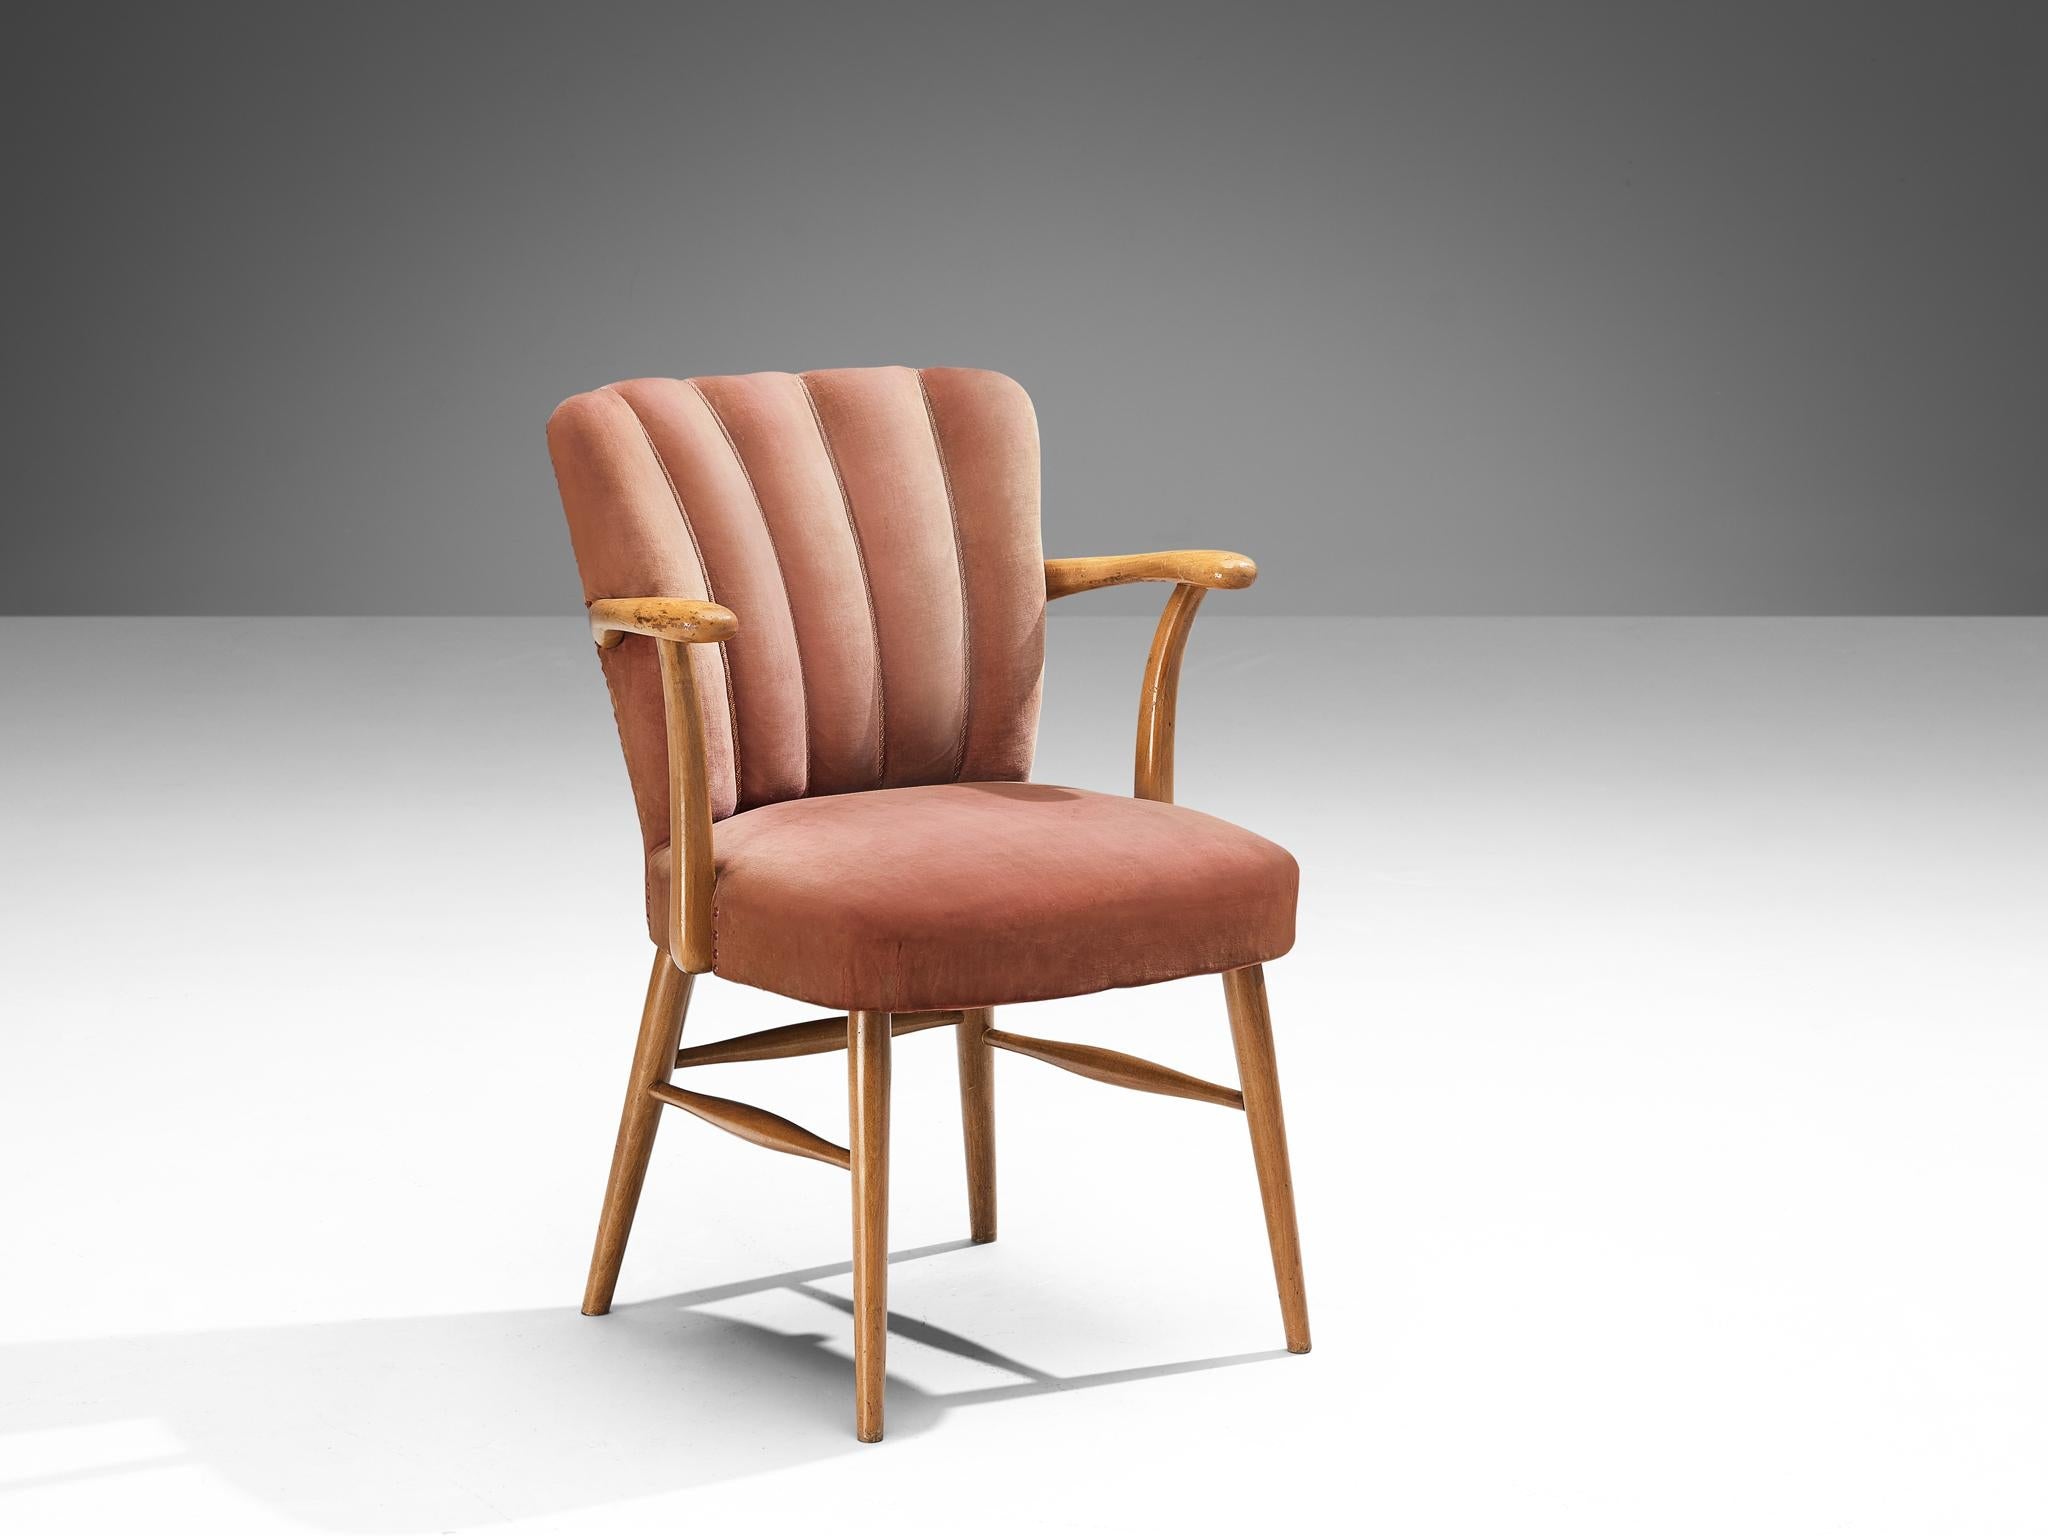 European Armchair in Soft Pink Velvet Upholstery and Wood